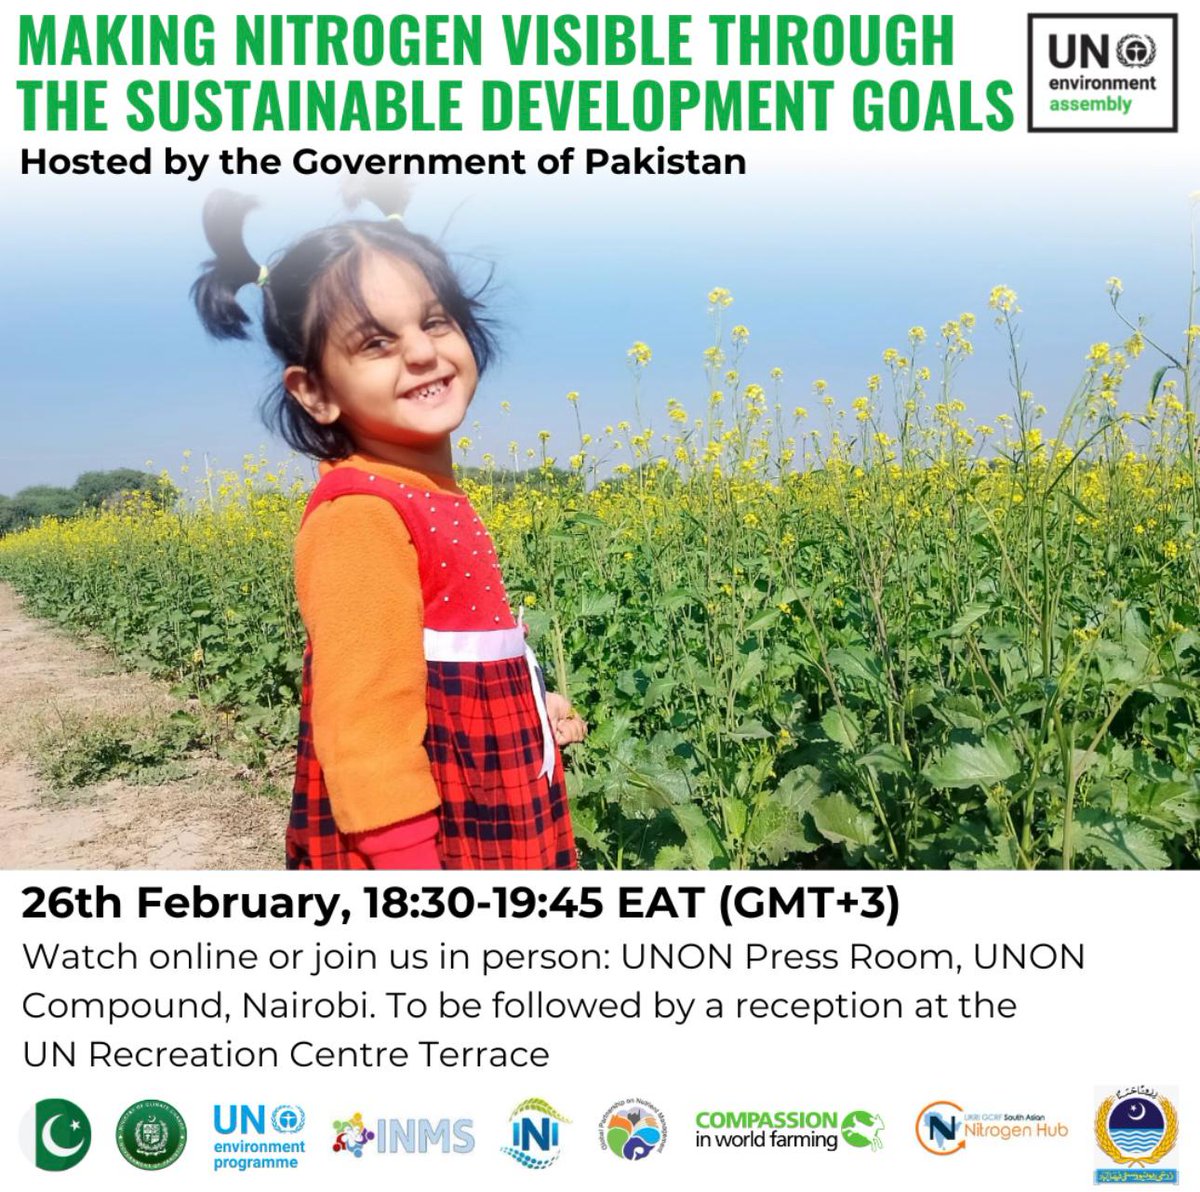 Our #Nitrogen event at #UNEA6 is also to be live streamed. Please click the link below to join the webinar: ukri.zoom.us/j/98748692986 📡 Webinar ID: 987 4869 2986